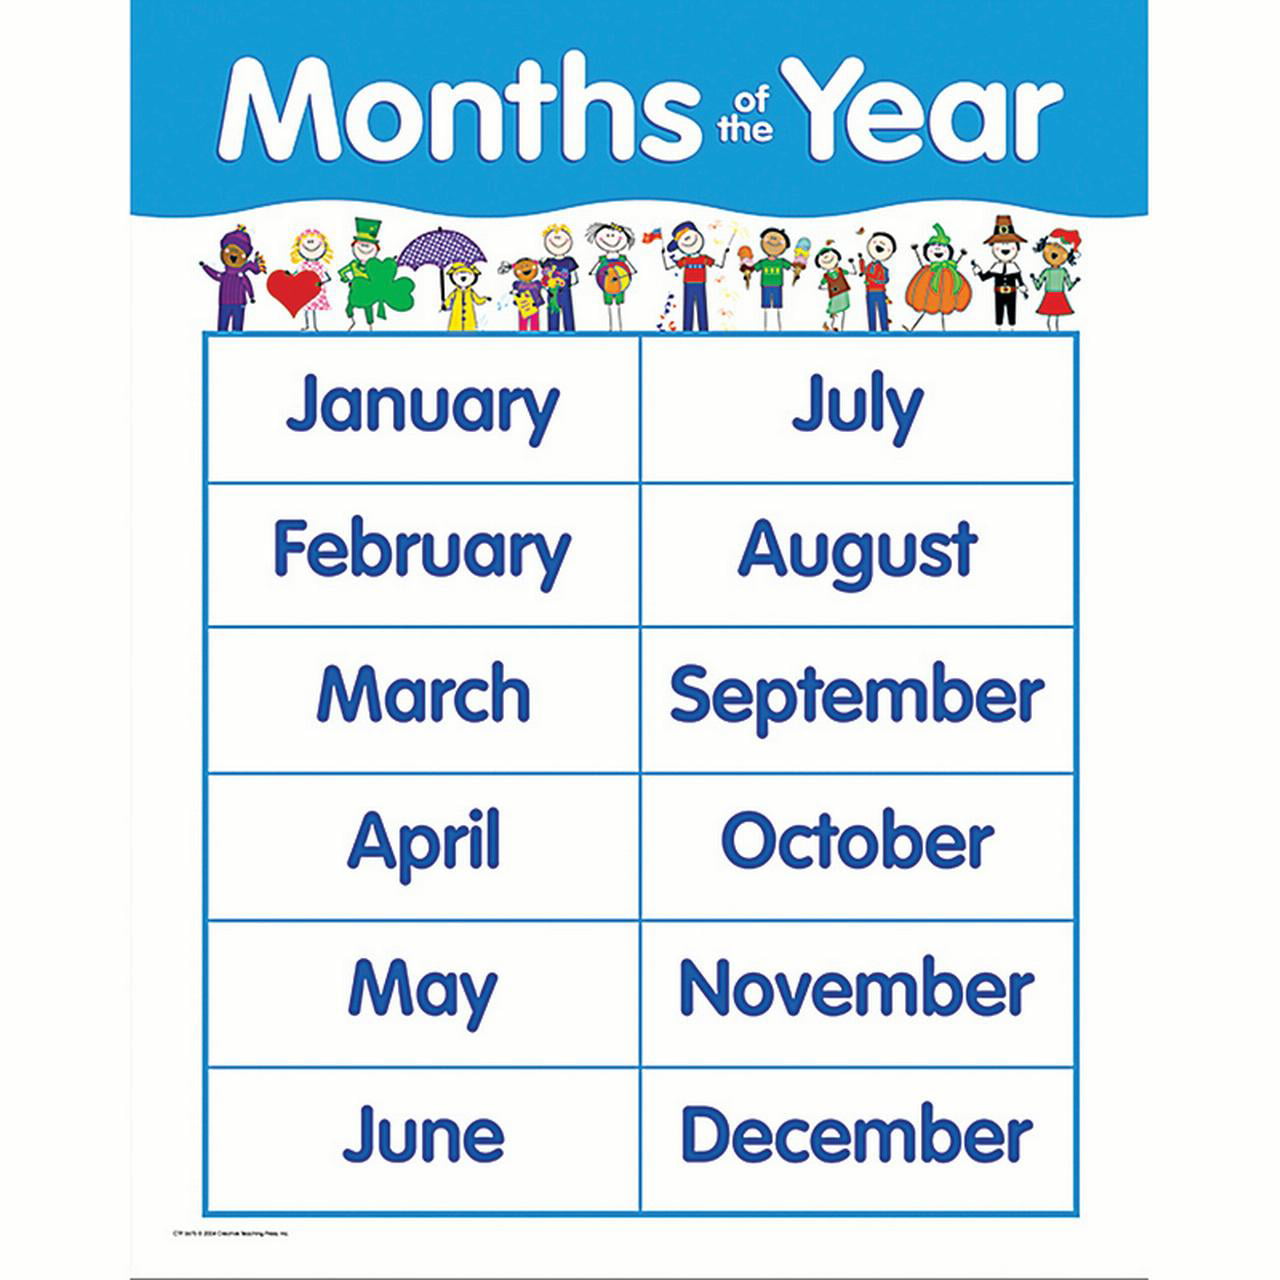 MONTHS OF THE YEAR SMALL CHART - Walmart.com